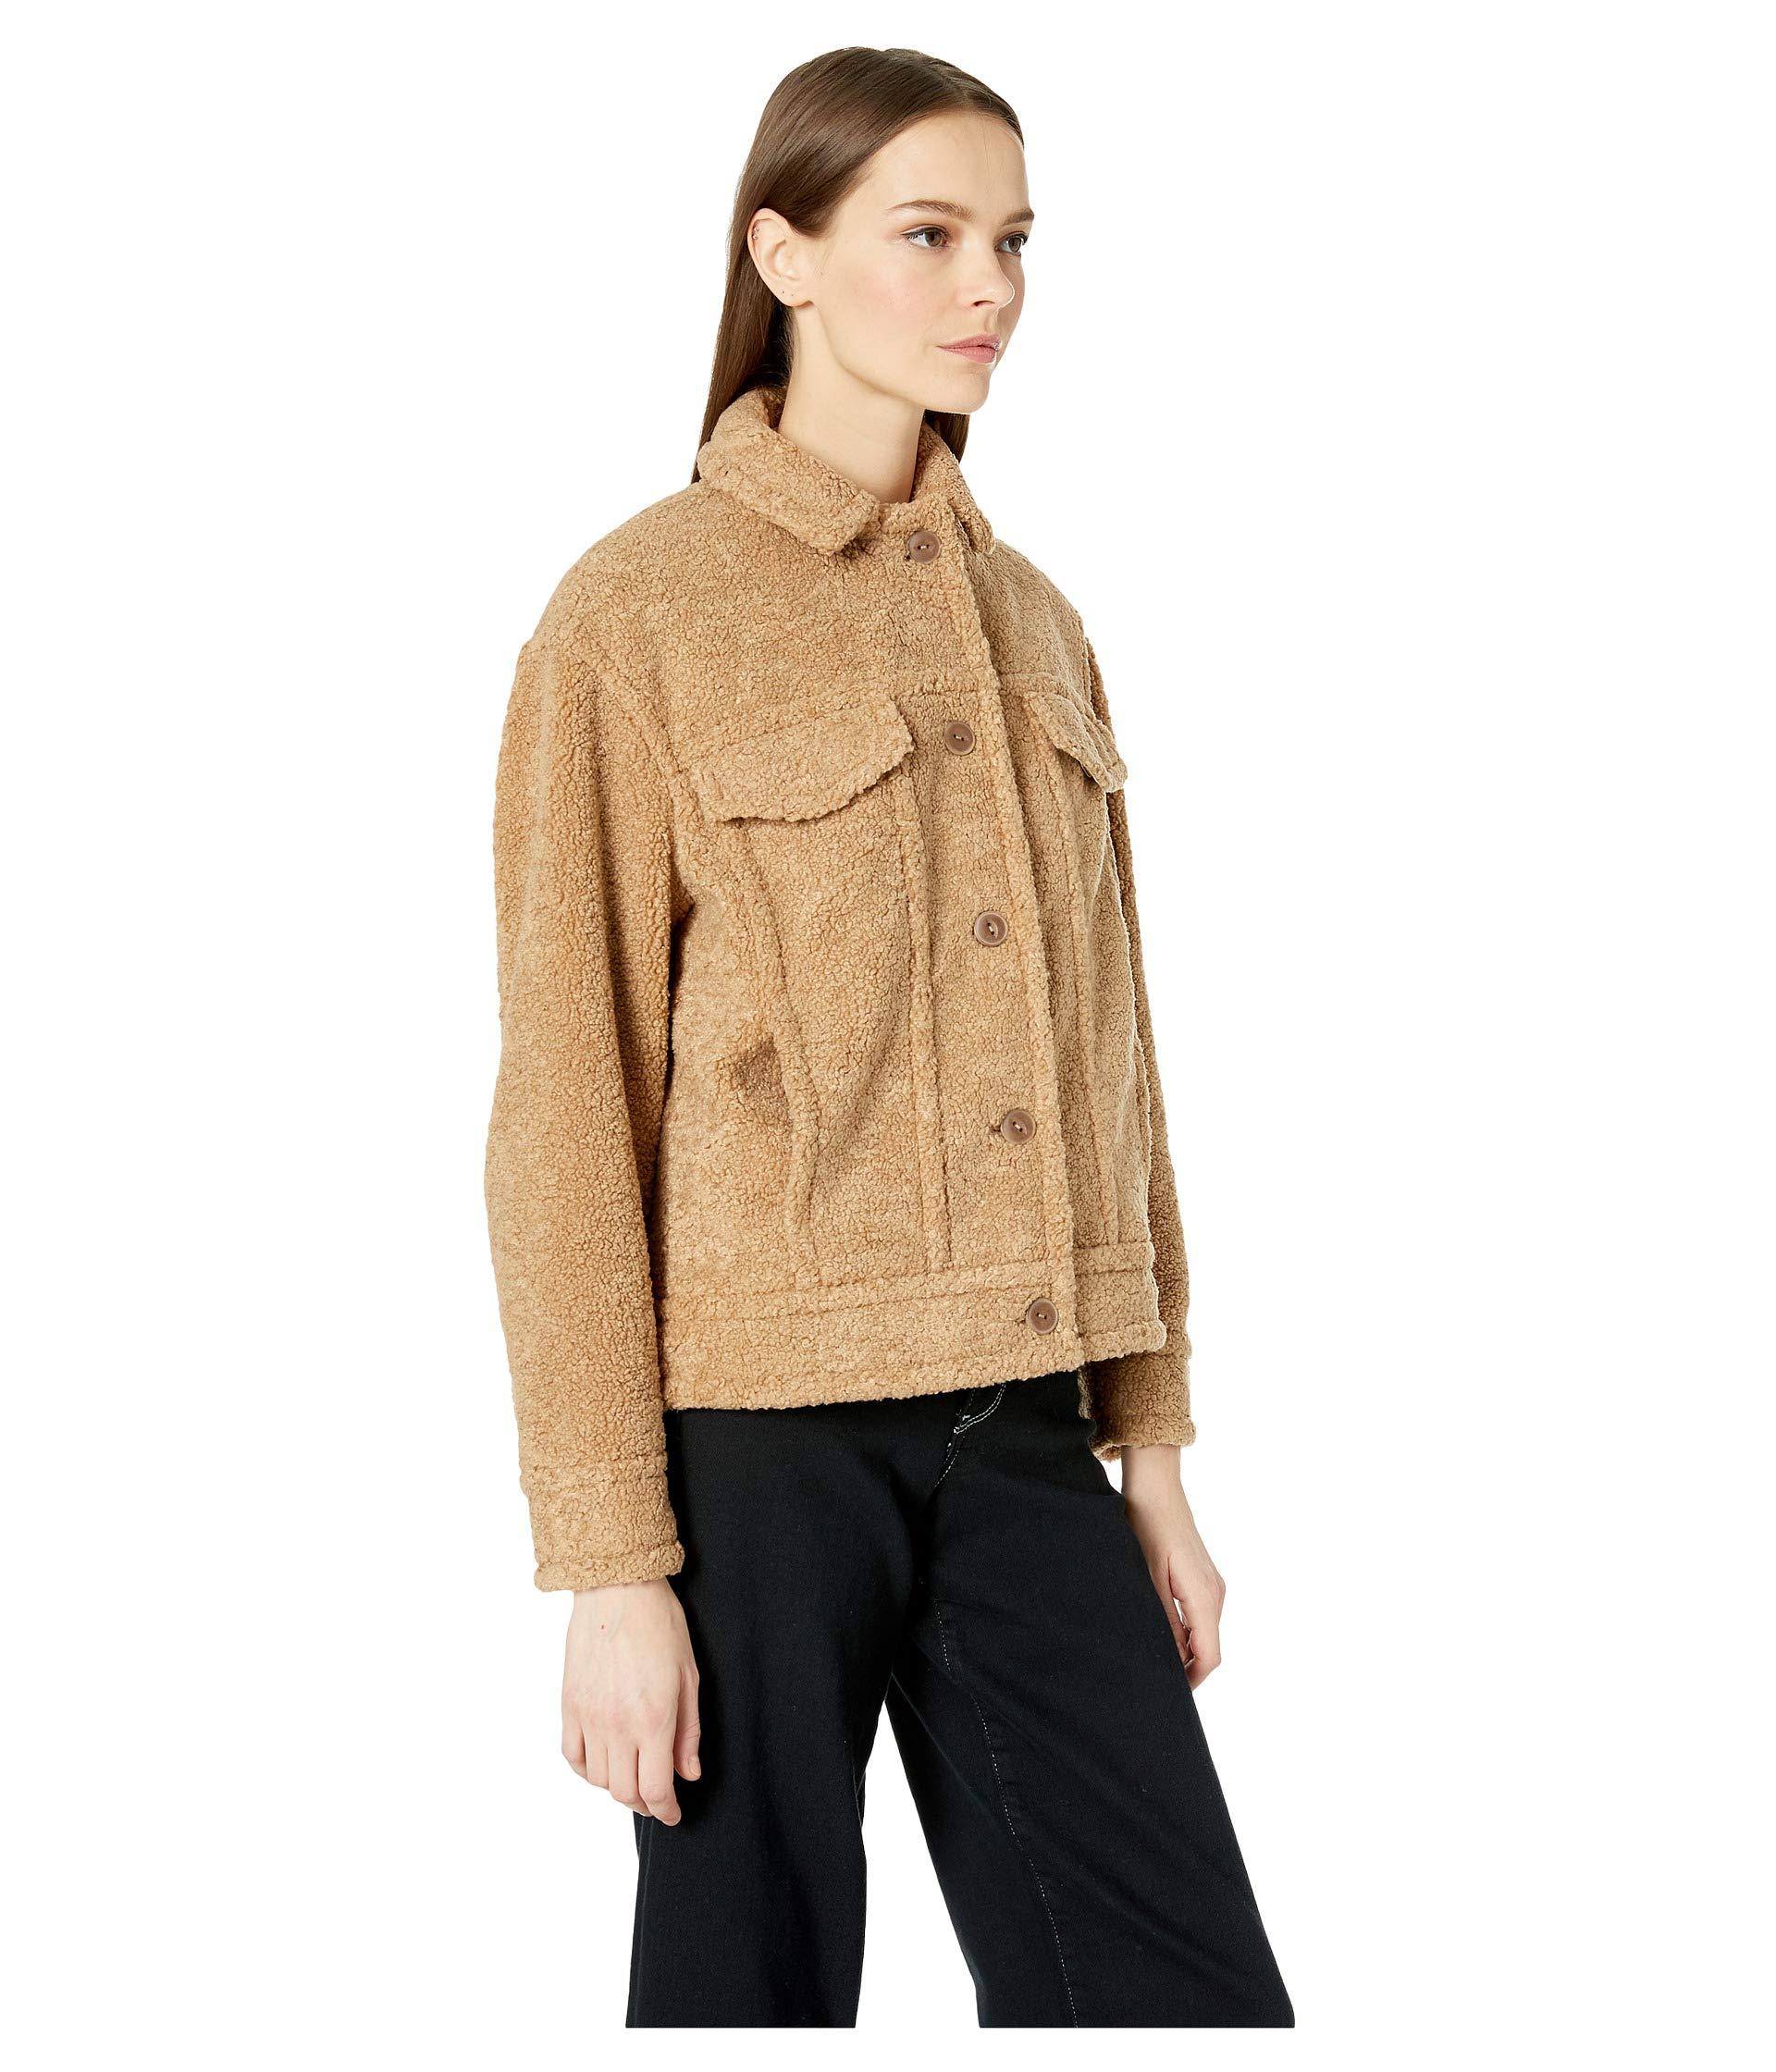 Vince Synthetic Sherpa Jacket in Desert Camel (Natural) - Lyst